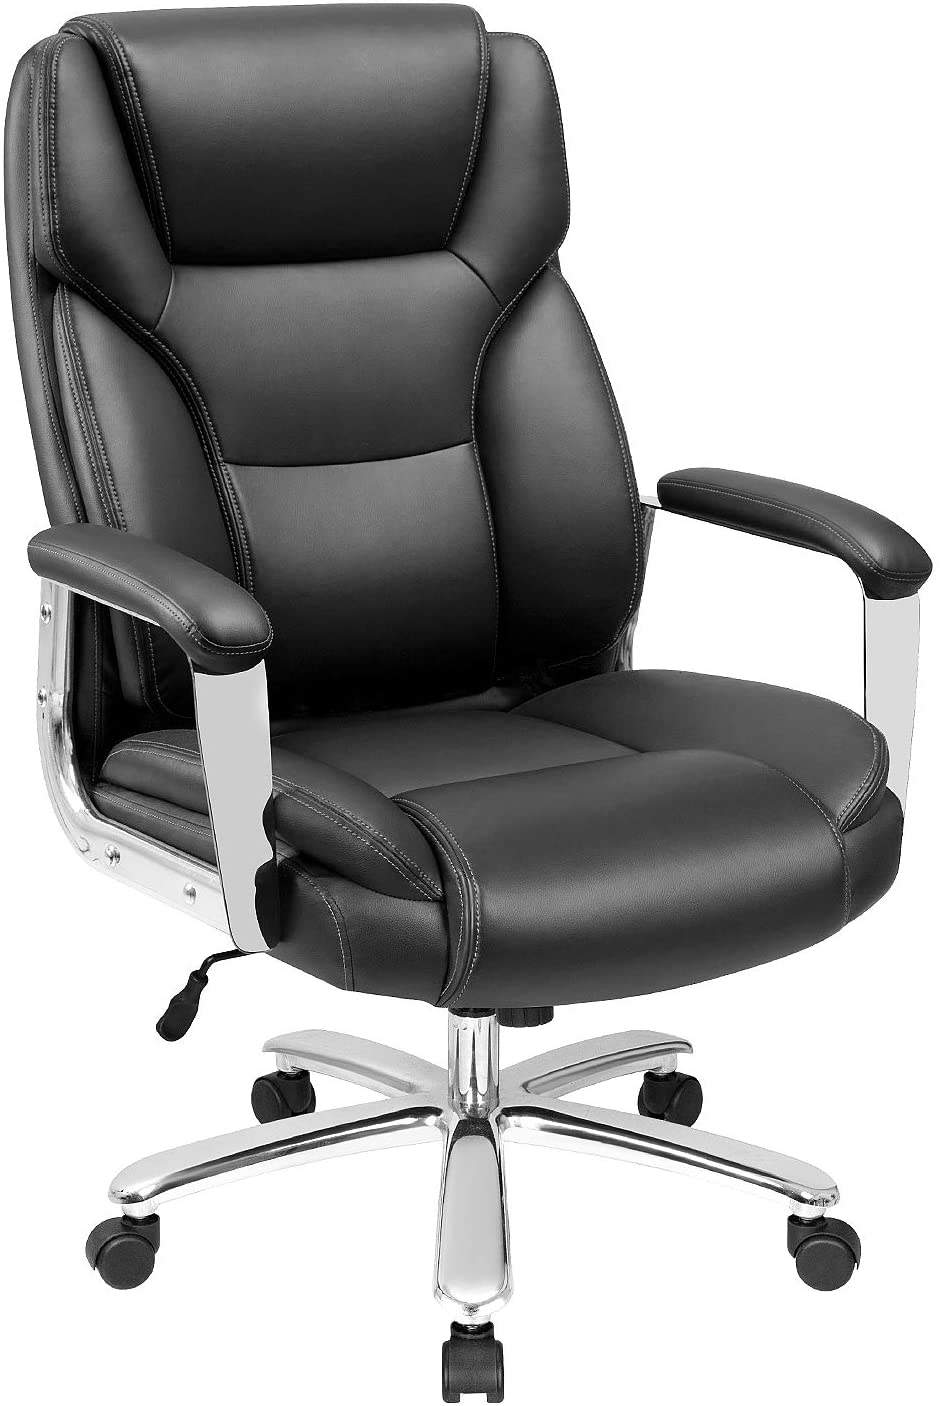 Big and Tall Office Desk Chair Leather Ergonomic High Back Executive Chair with Lumbar Support Swivel Computer Task Chair with Armrest (Black)